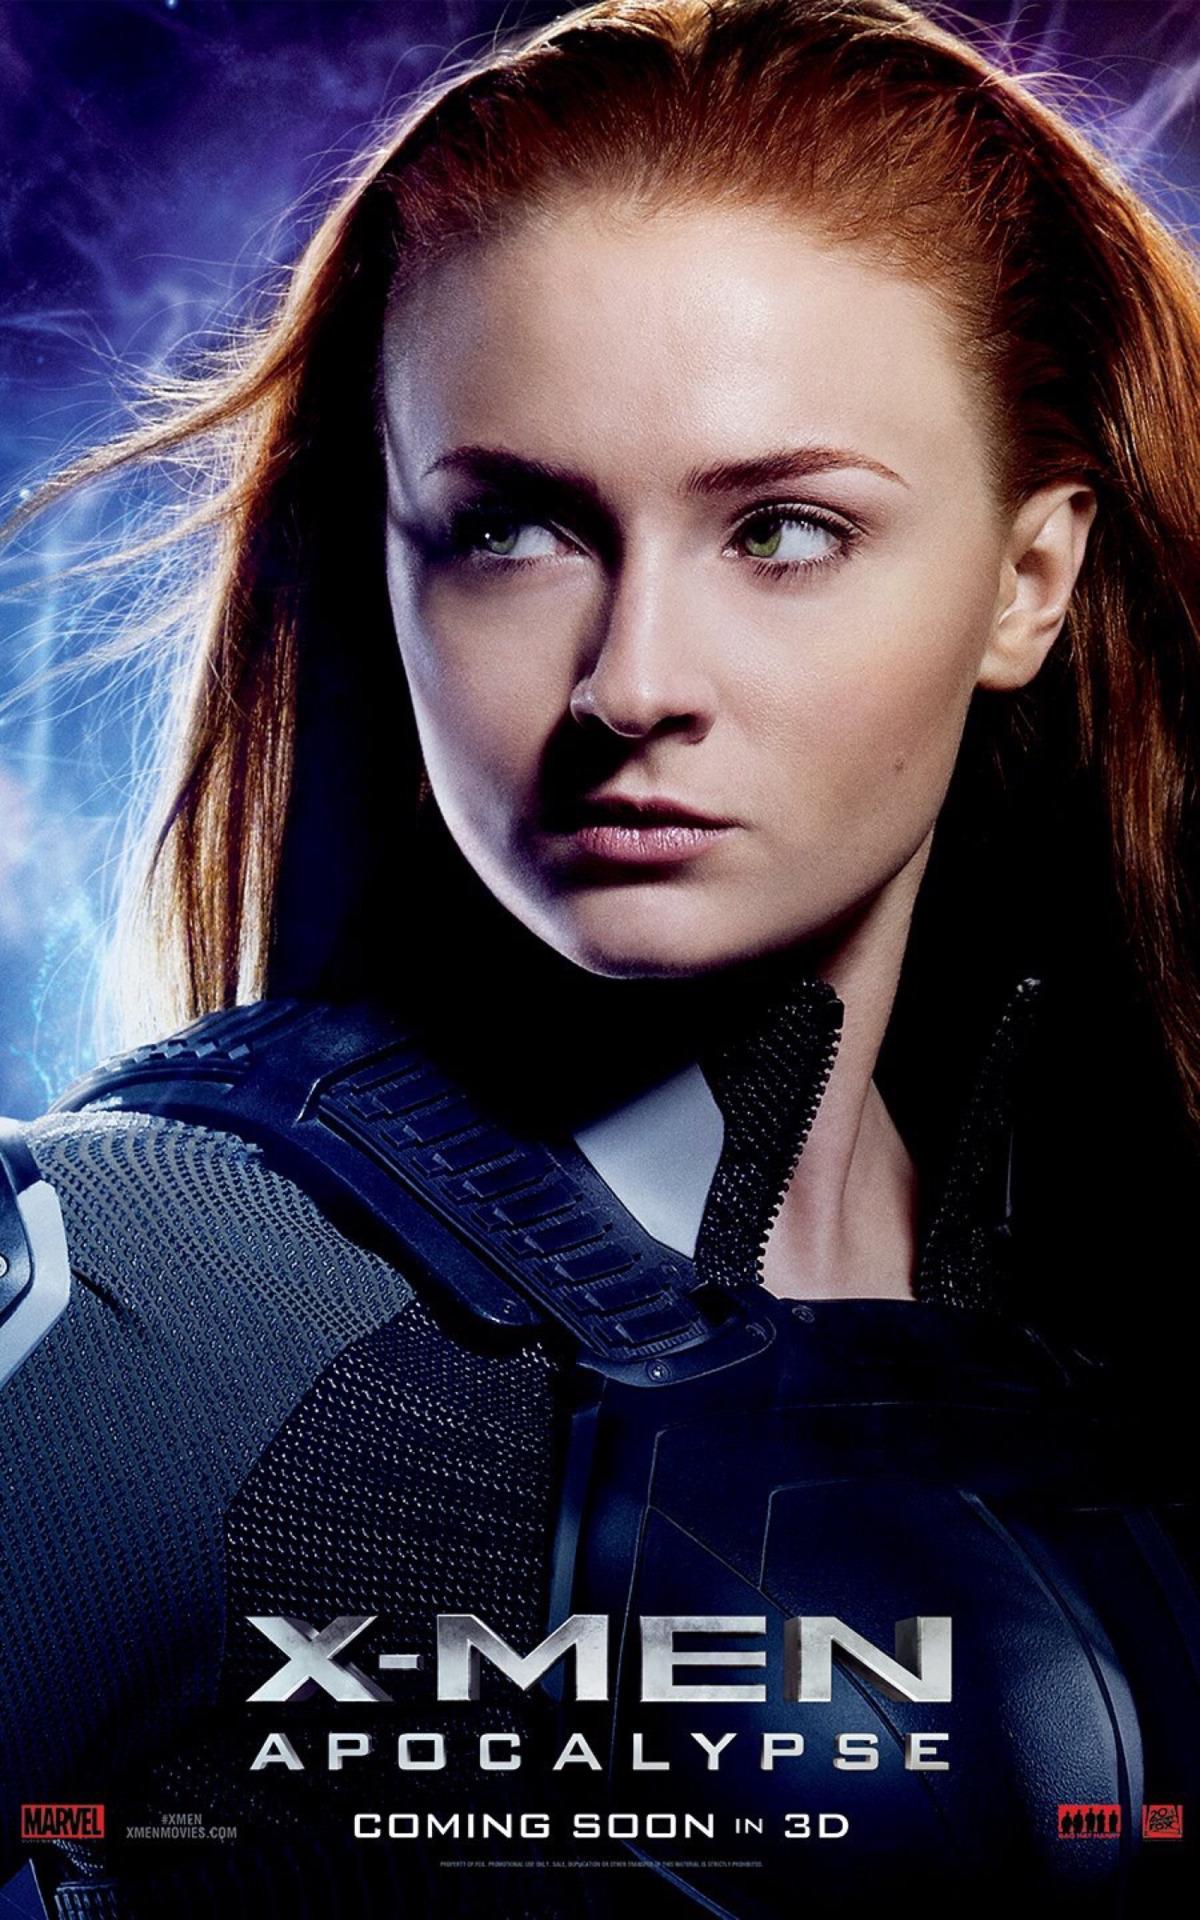 Sophie Turner Wallpaper, Where You Can Download This